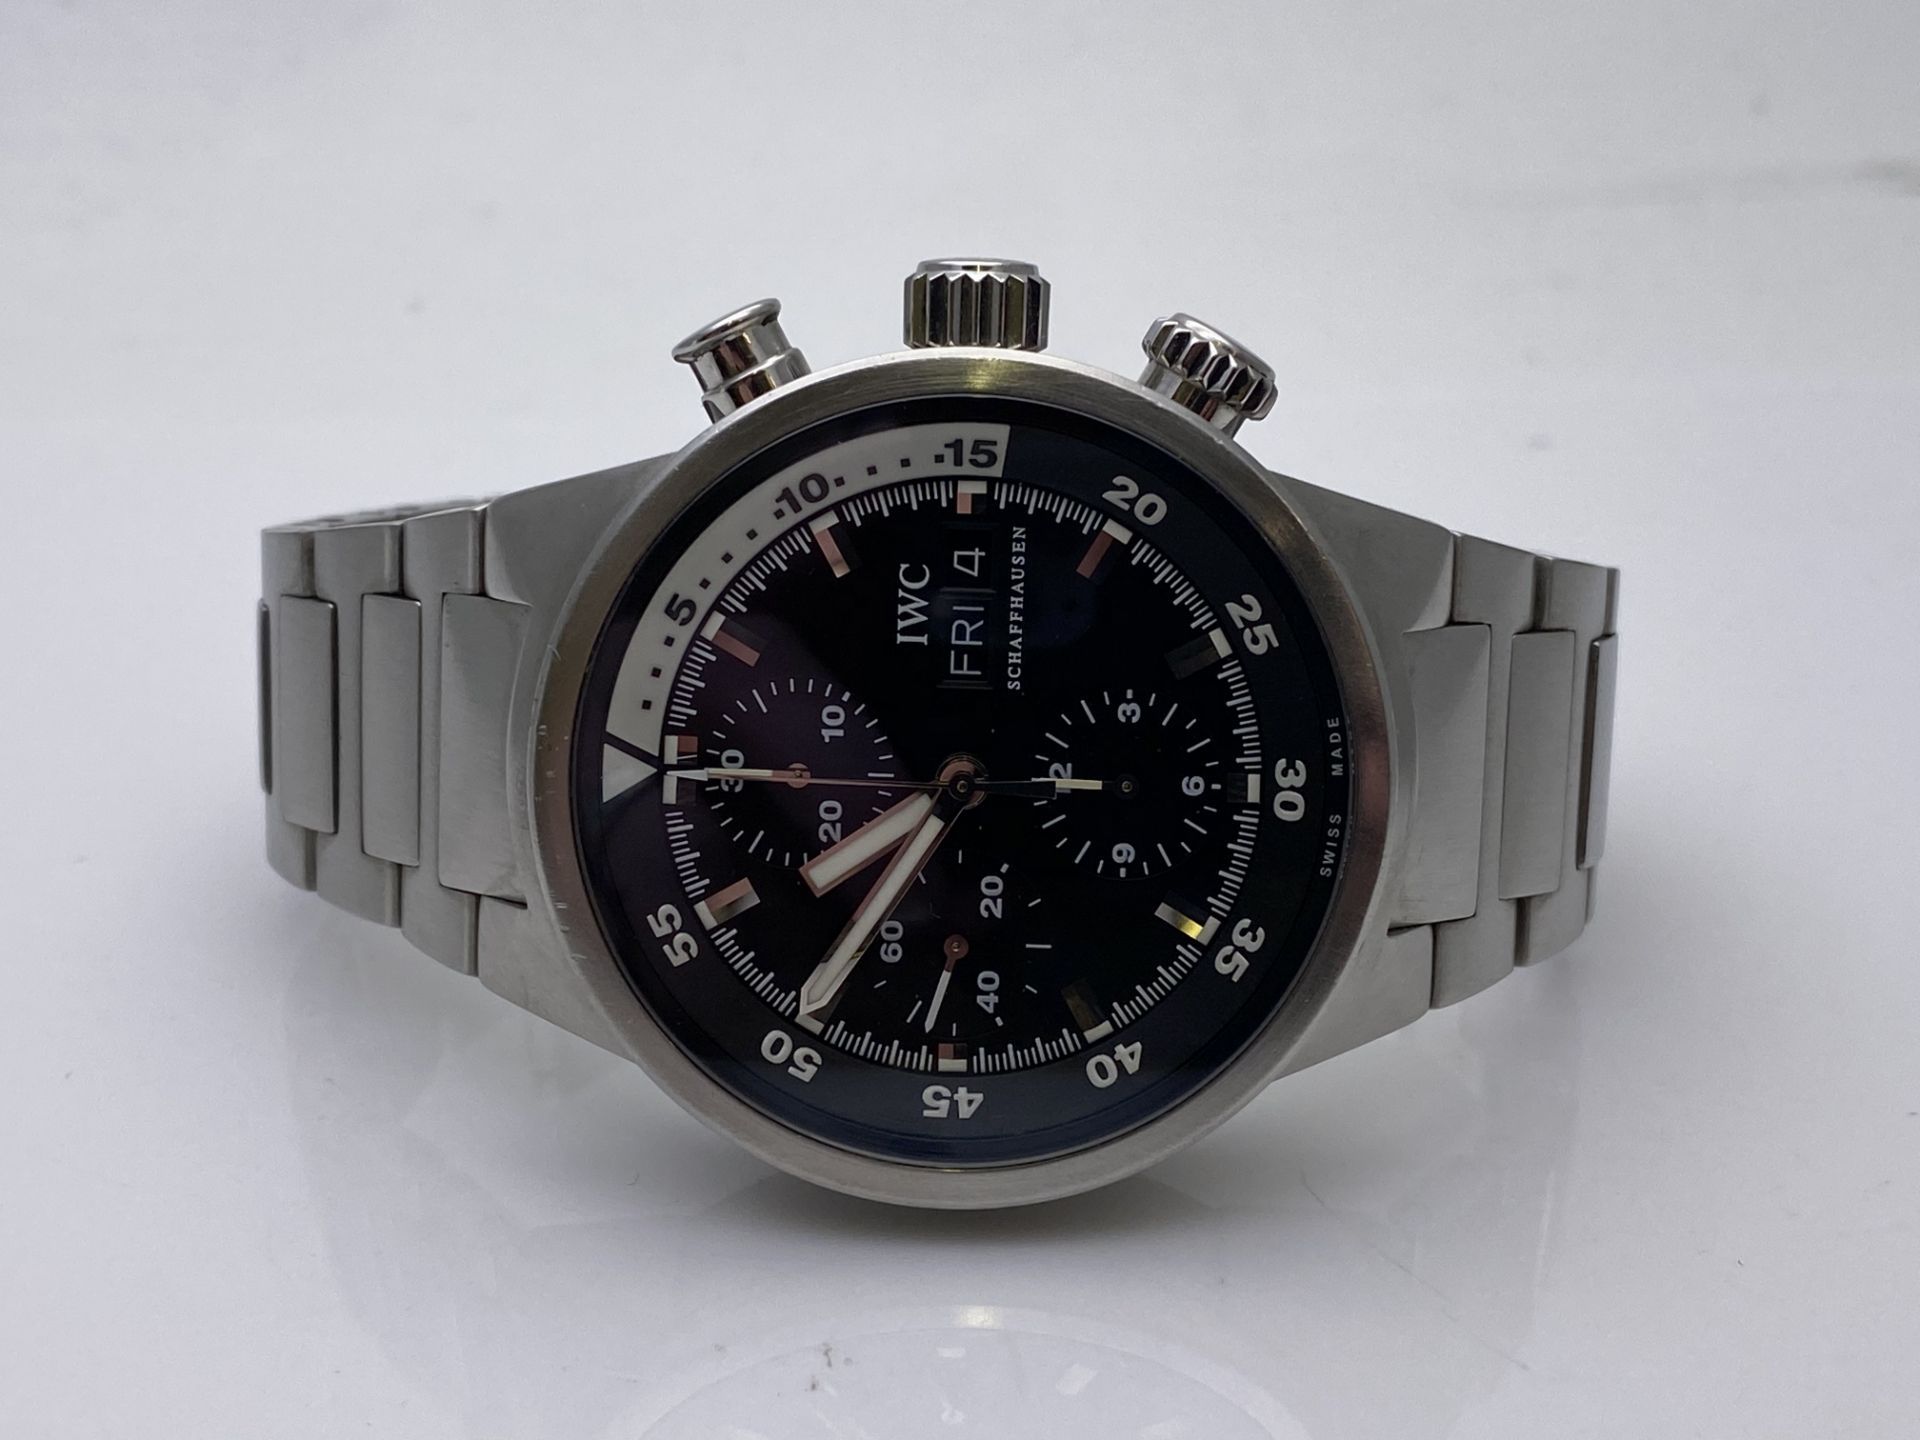 GENTS IWC STAINLESS STEEL WATCH, MODEL- IW3F1928, Aquatimer Chrono-Automatic Stainless Steel / Black